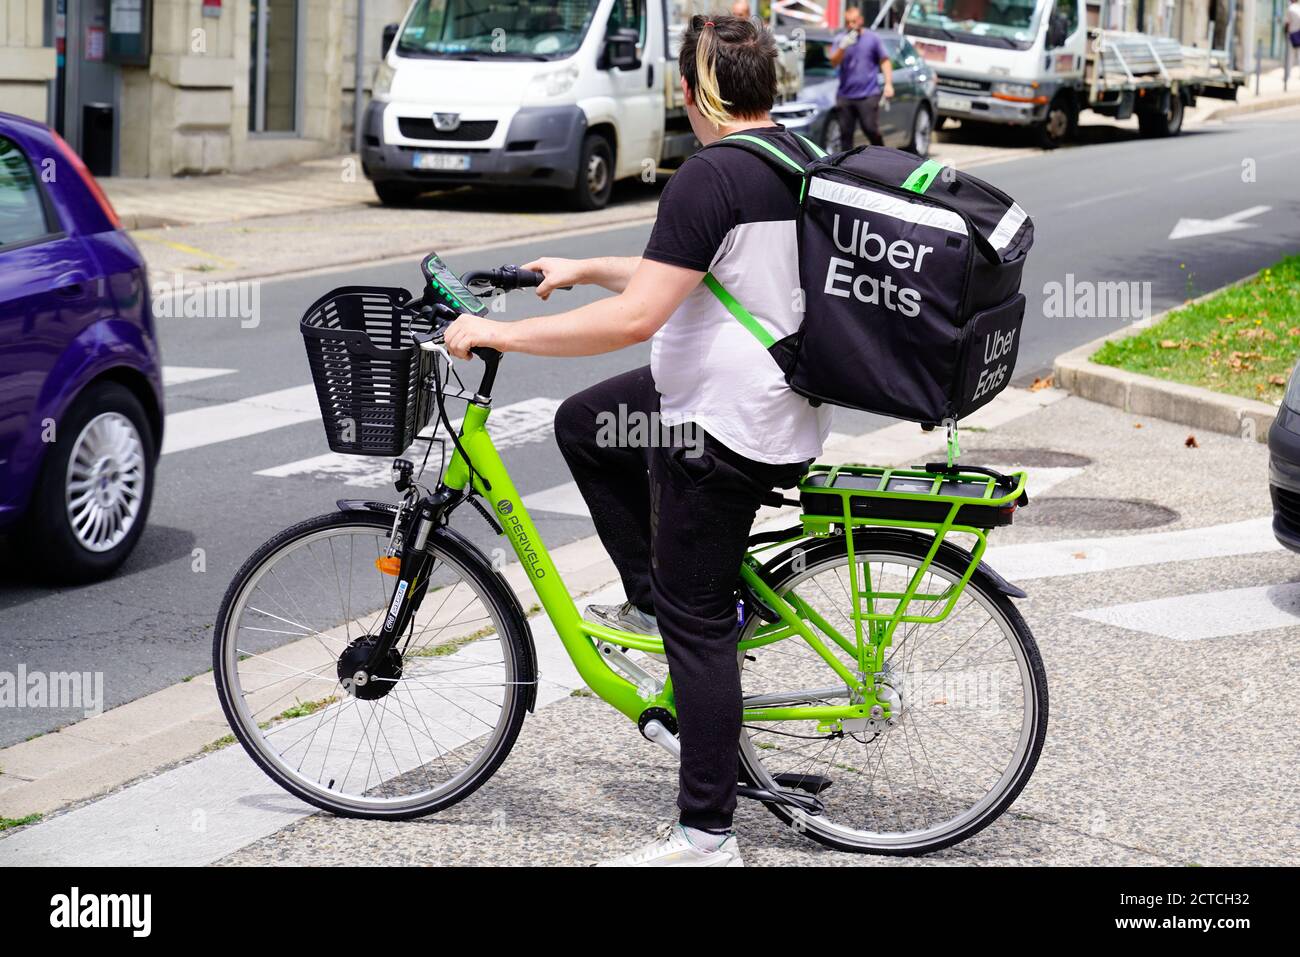 Perigueux , Aquitaine / France - 09 20 2020 : Ubereats bike delivery man  with backpack Uber eats deliver restaurant to home or office Stock Photo -  Alamy